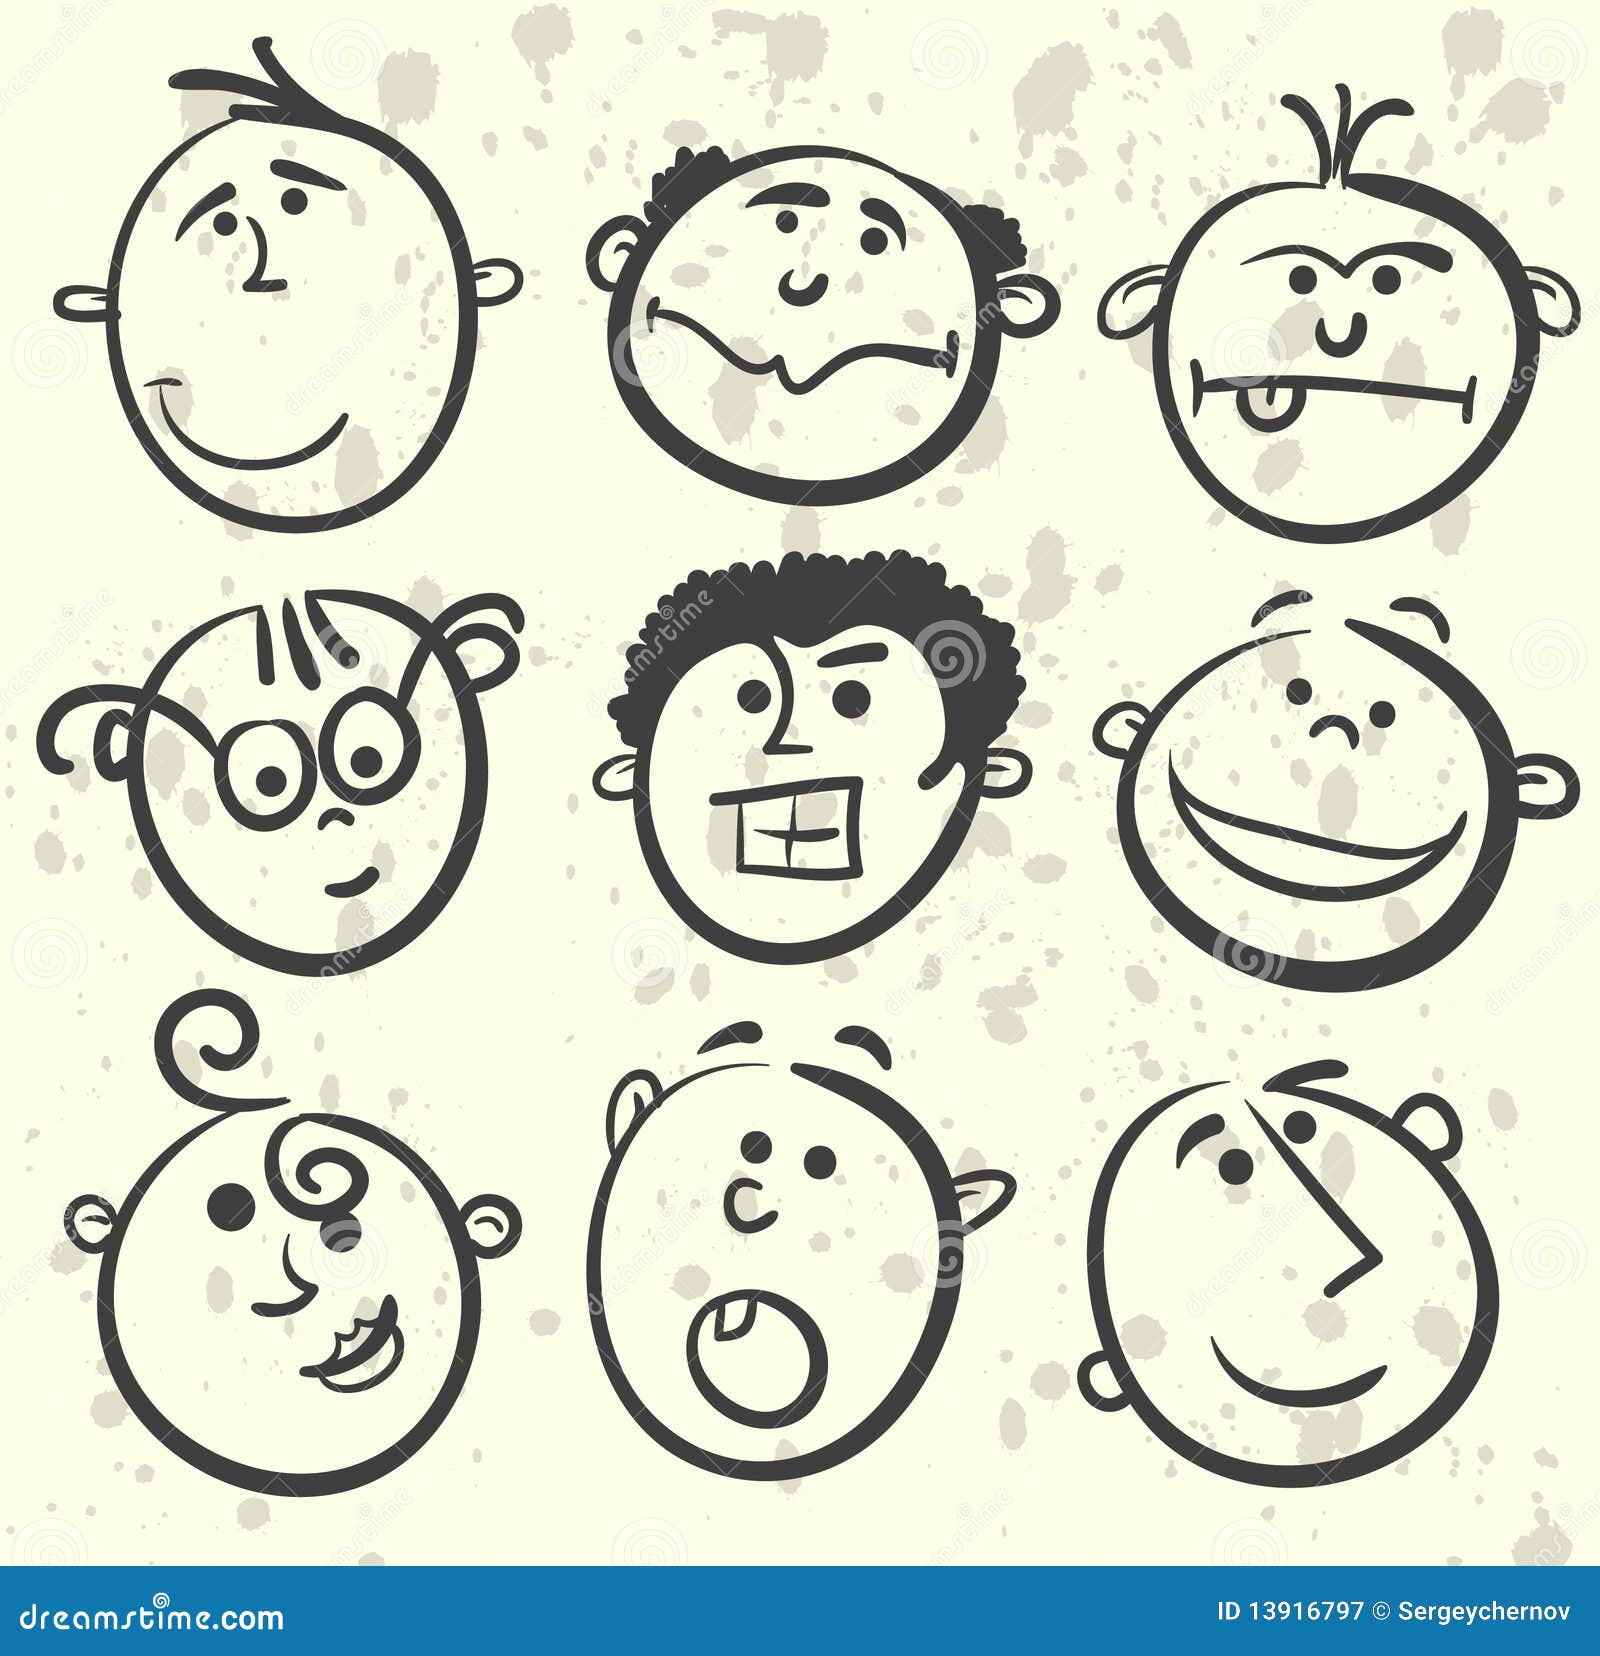 Face Illustration Cartoon Collection Stock Vector - Illustration of comic,  graphic: 13916797